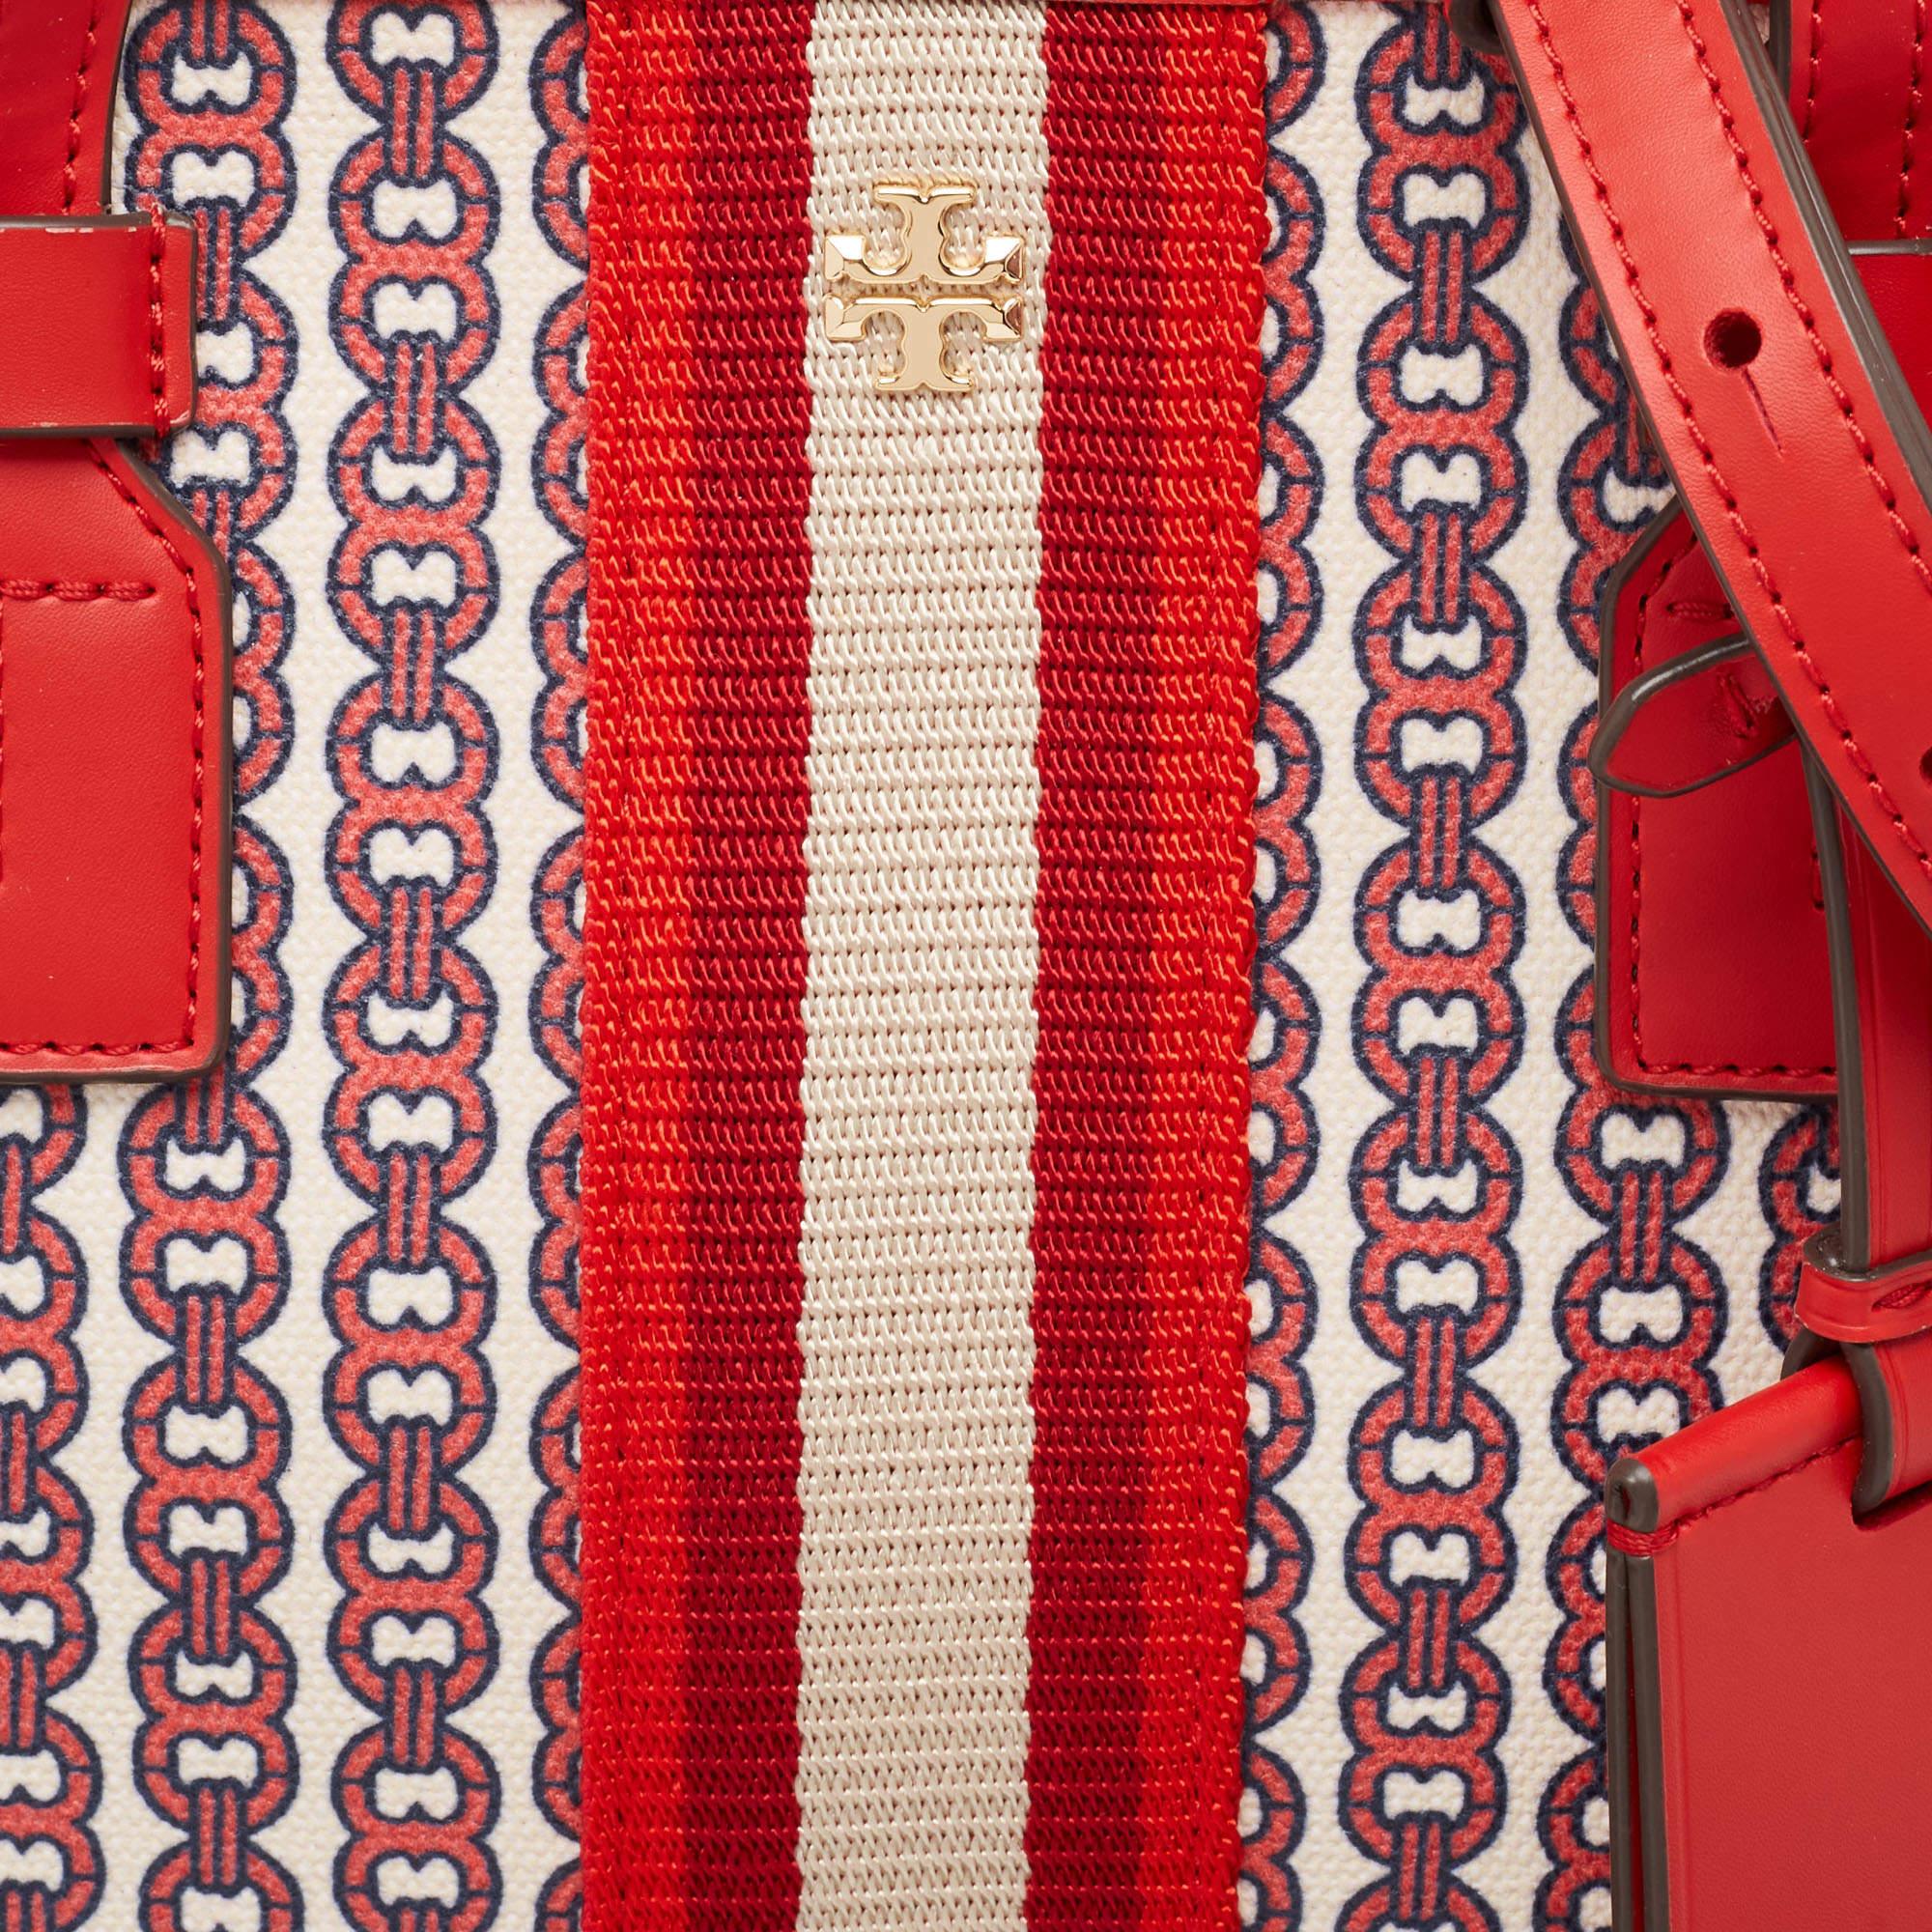 Tory Burch Red Coated Canvas and Leather Gemini Link Top Zip Tote 4